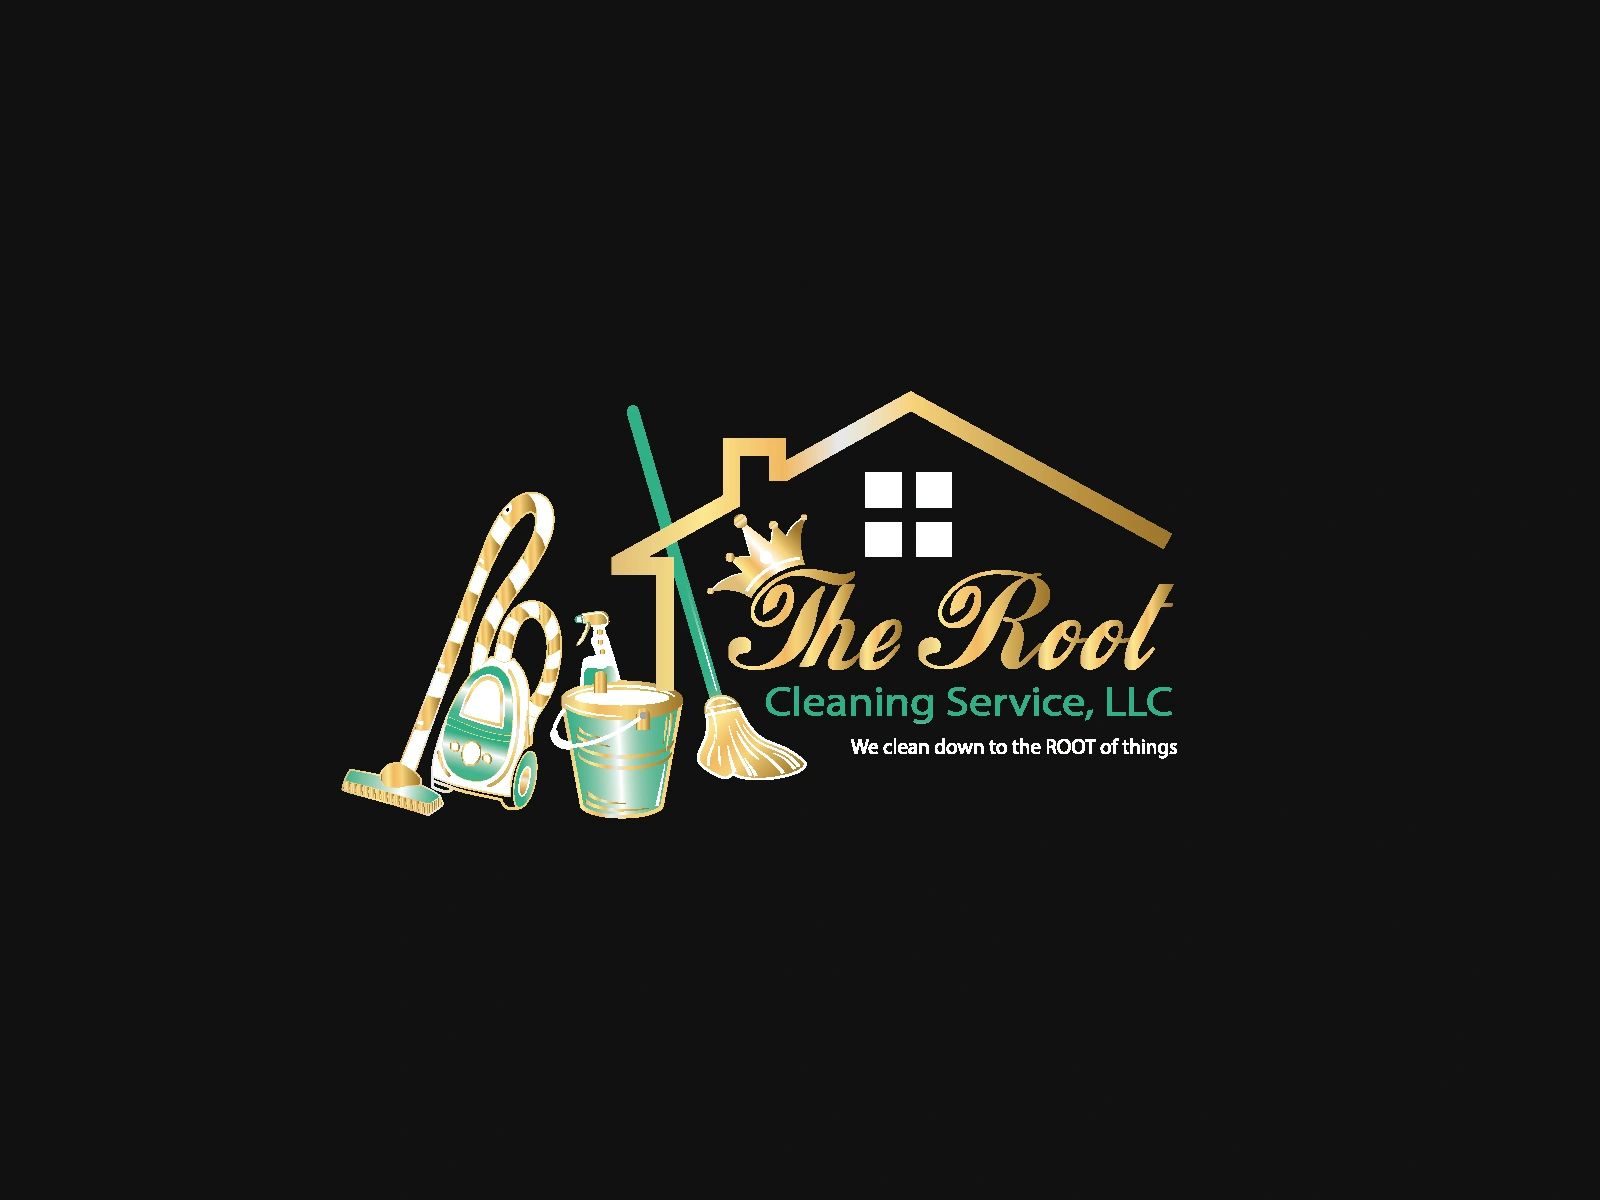 therootcleaningservicellc.com